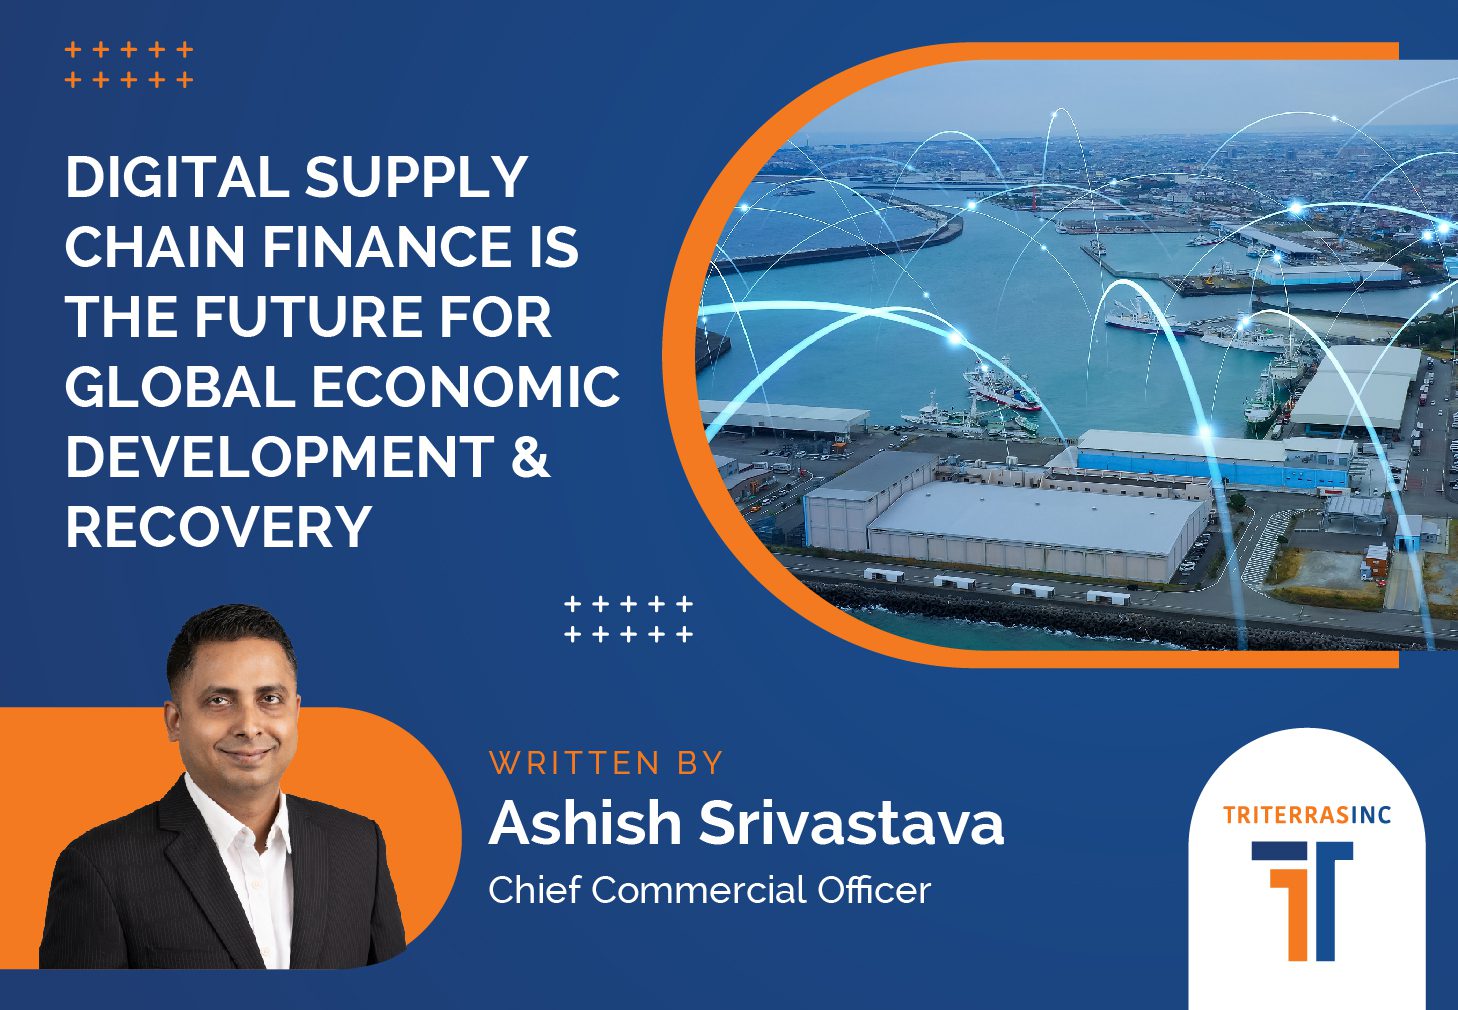 Banner image of the resource titled 'DIGITAL SUPPLY CHAIN FINANCE IS THE FUTURE FOR GLOBAL ECONOMIC DEVELOPMENT & RECOVERY' by Ashish Srivastava, Chief Commercial Officer at Triterras.